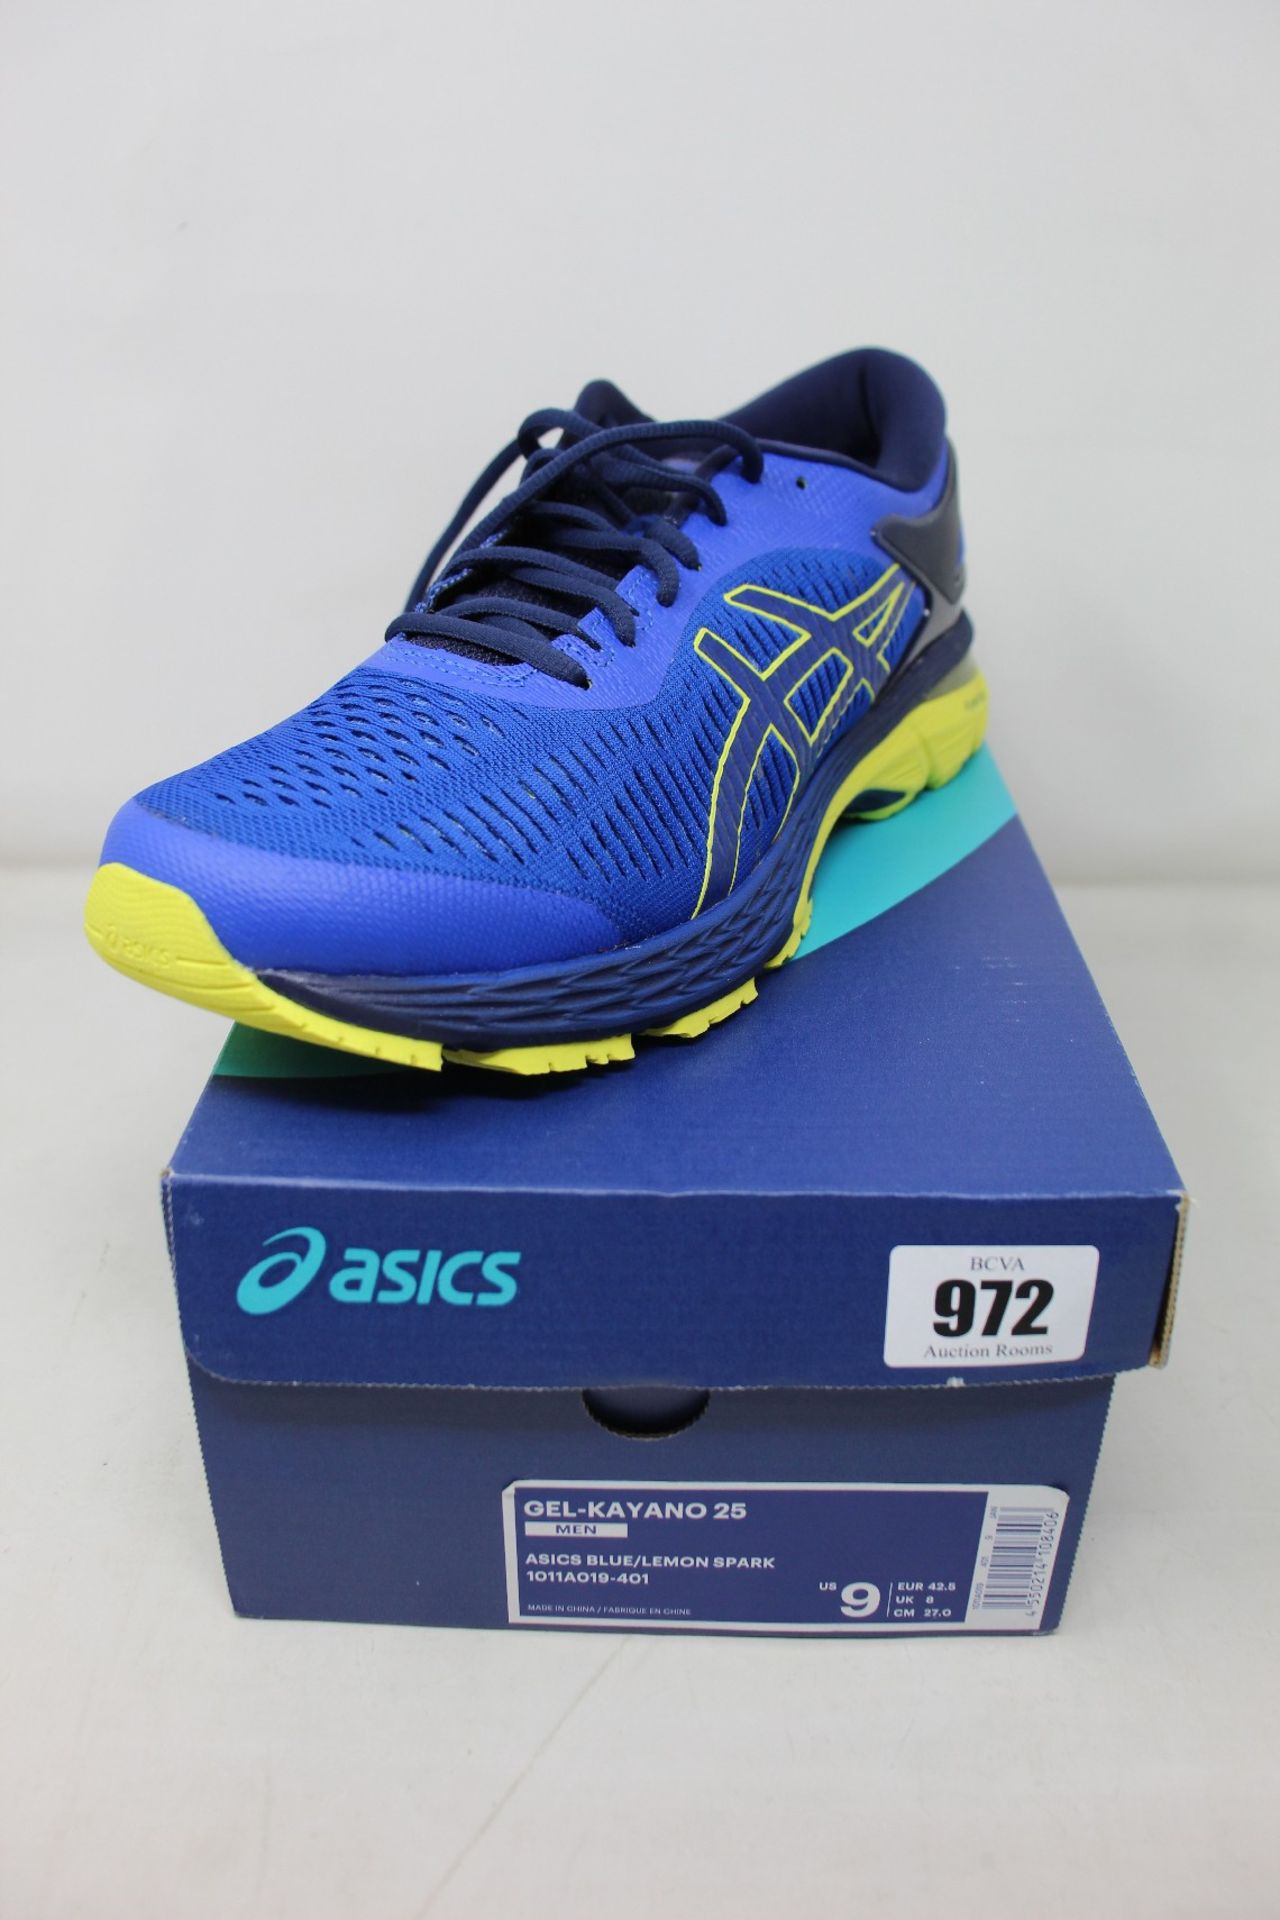 A pair of men's as new Asics Gel-Kayano 25 trainers (UK 8).